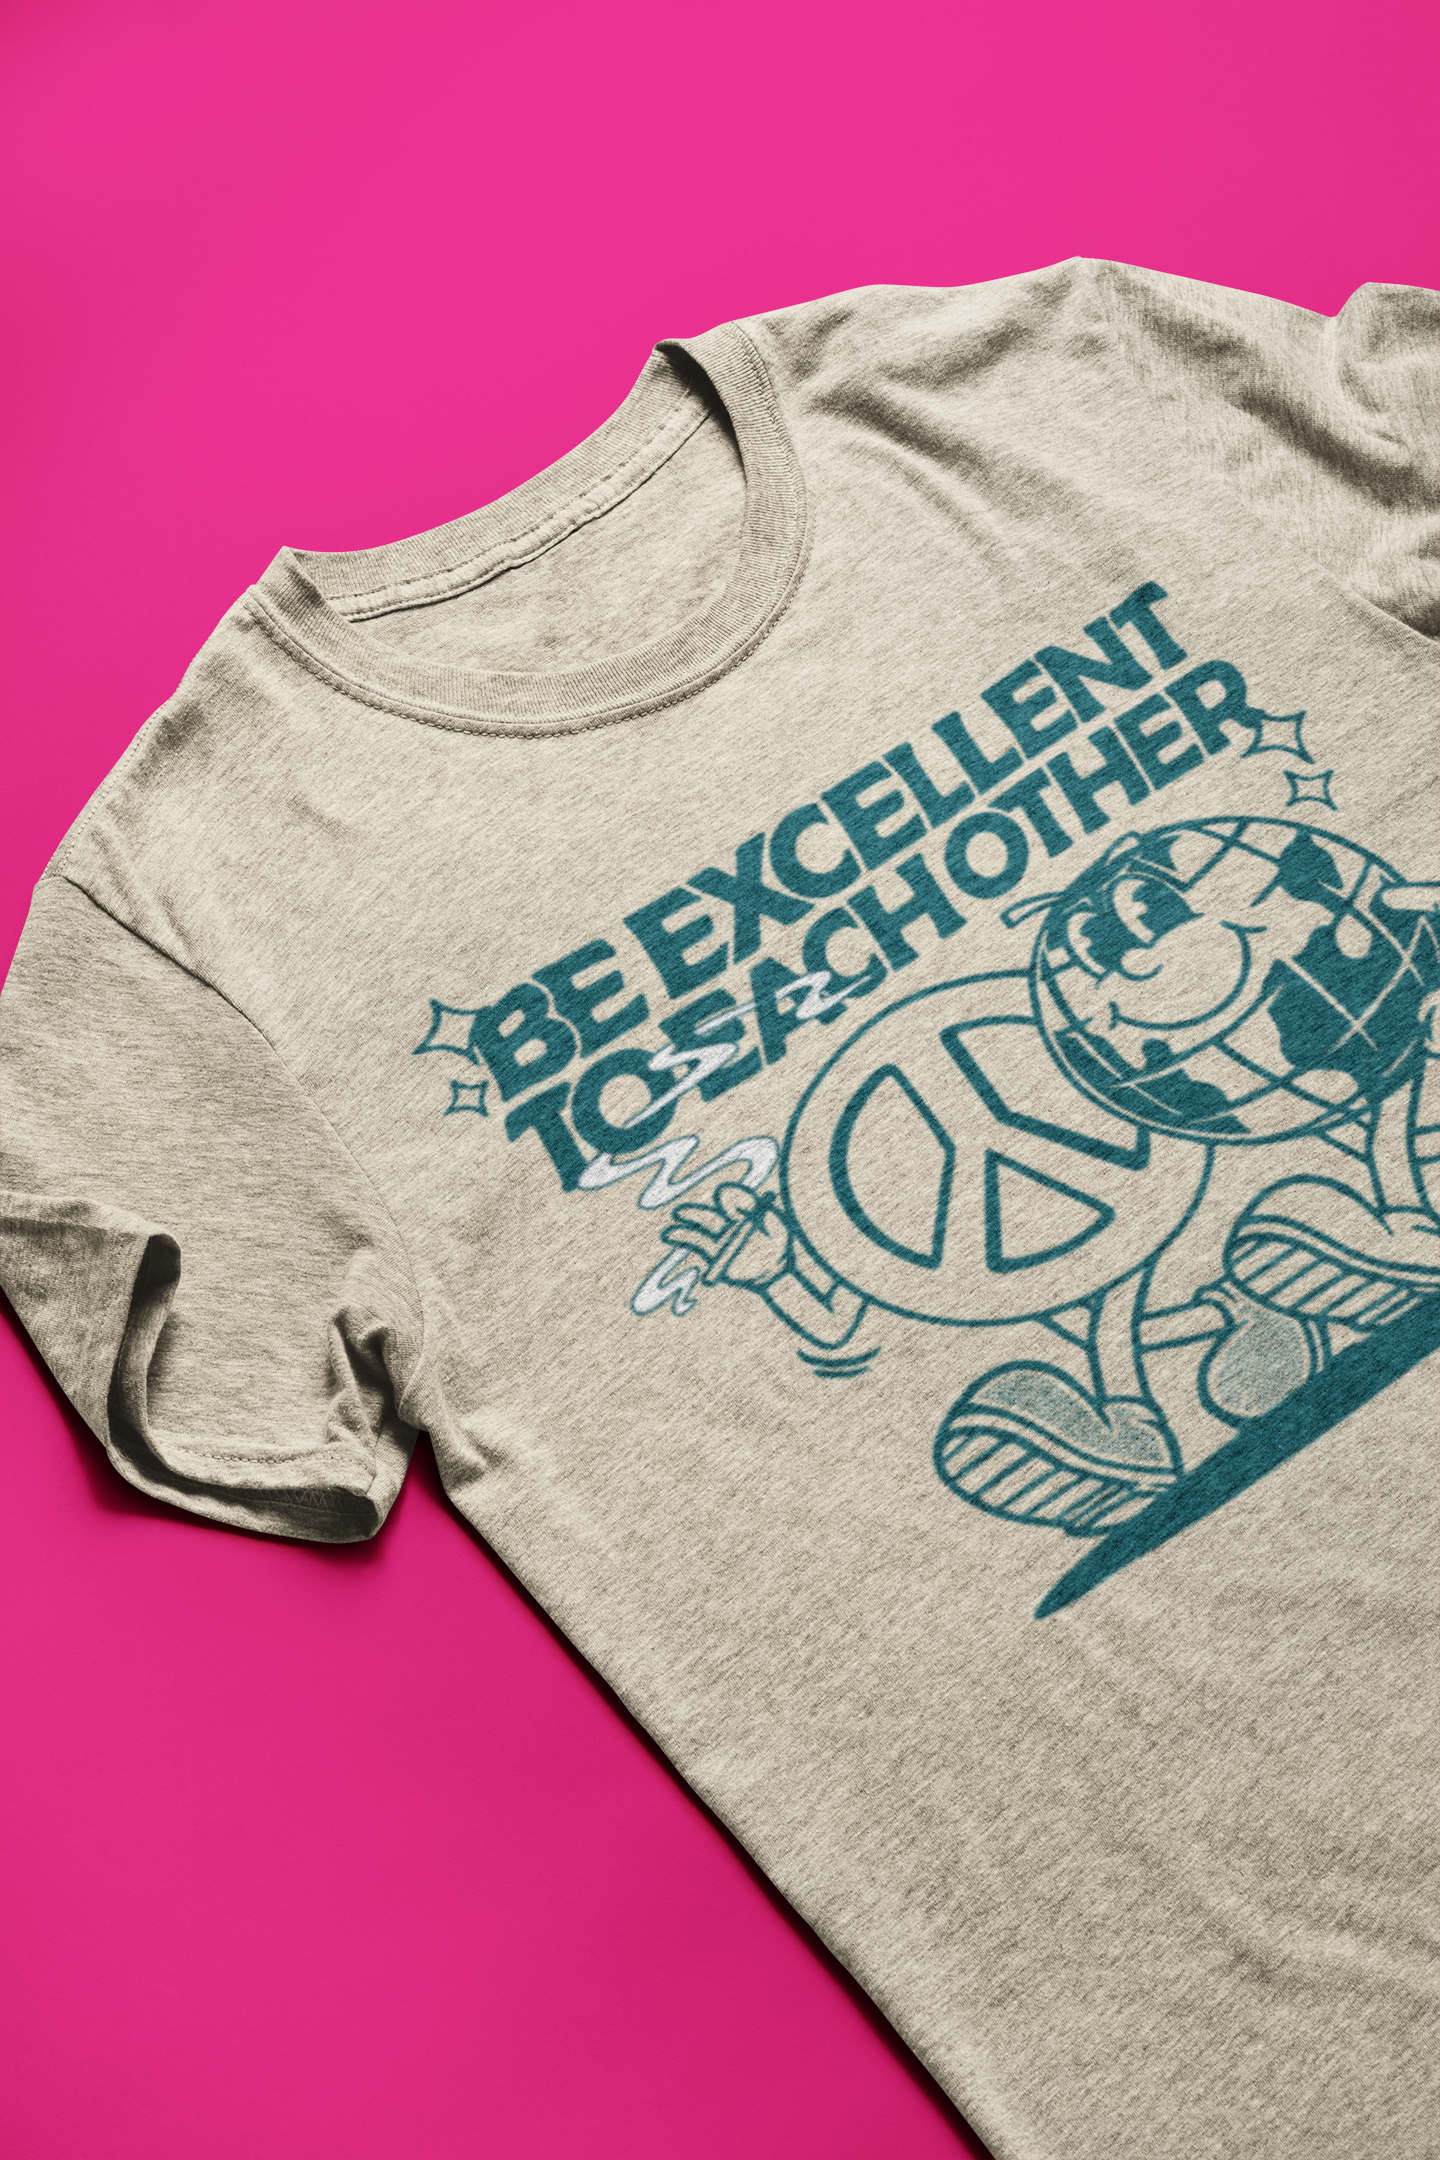 Be Excellent to Each Other - Peace Planet Tee